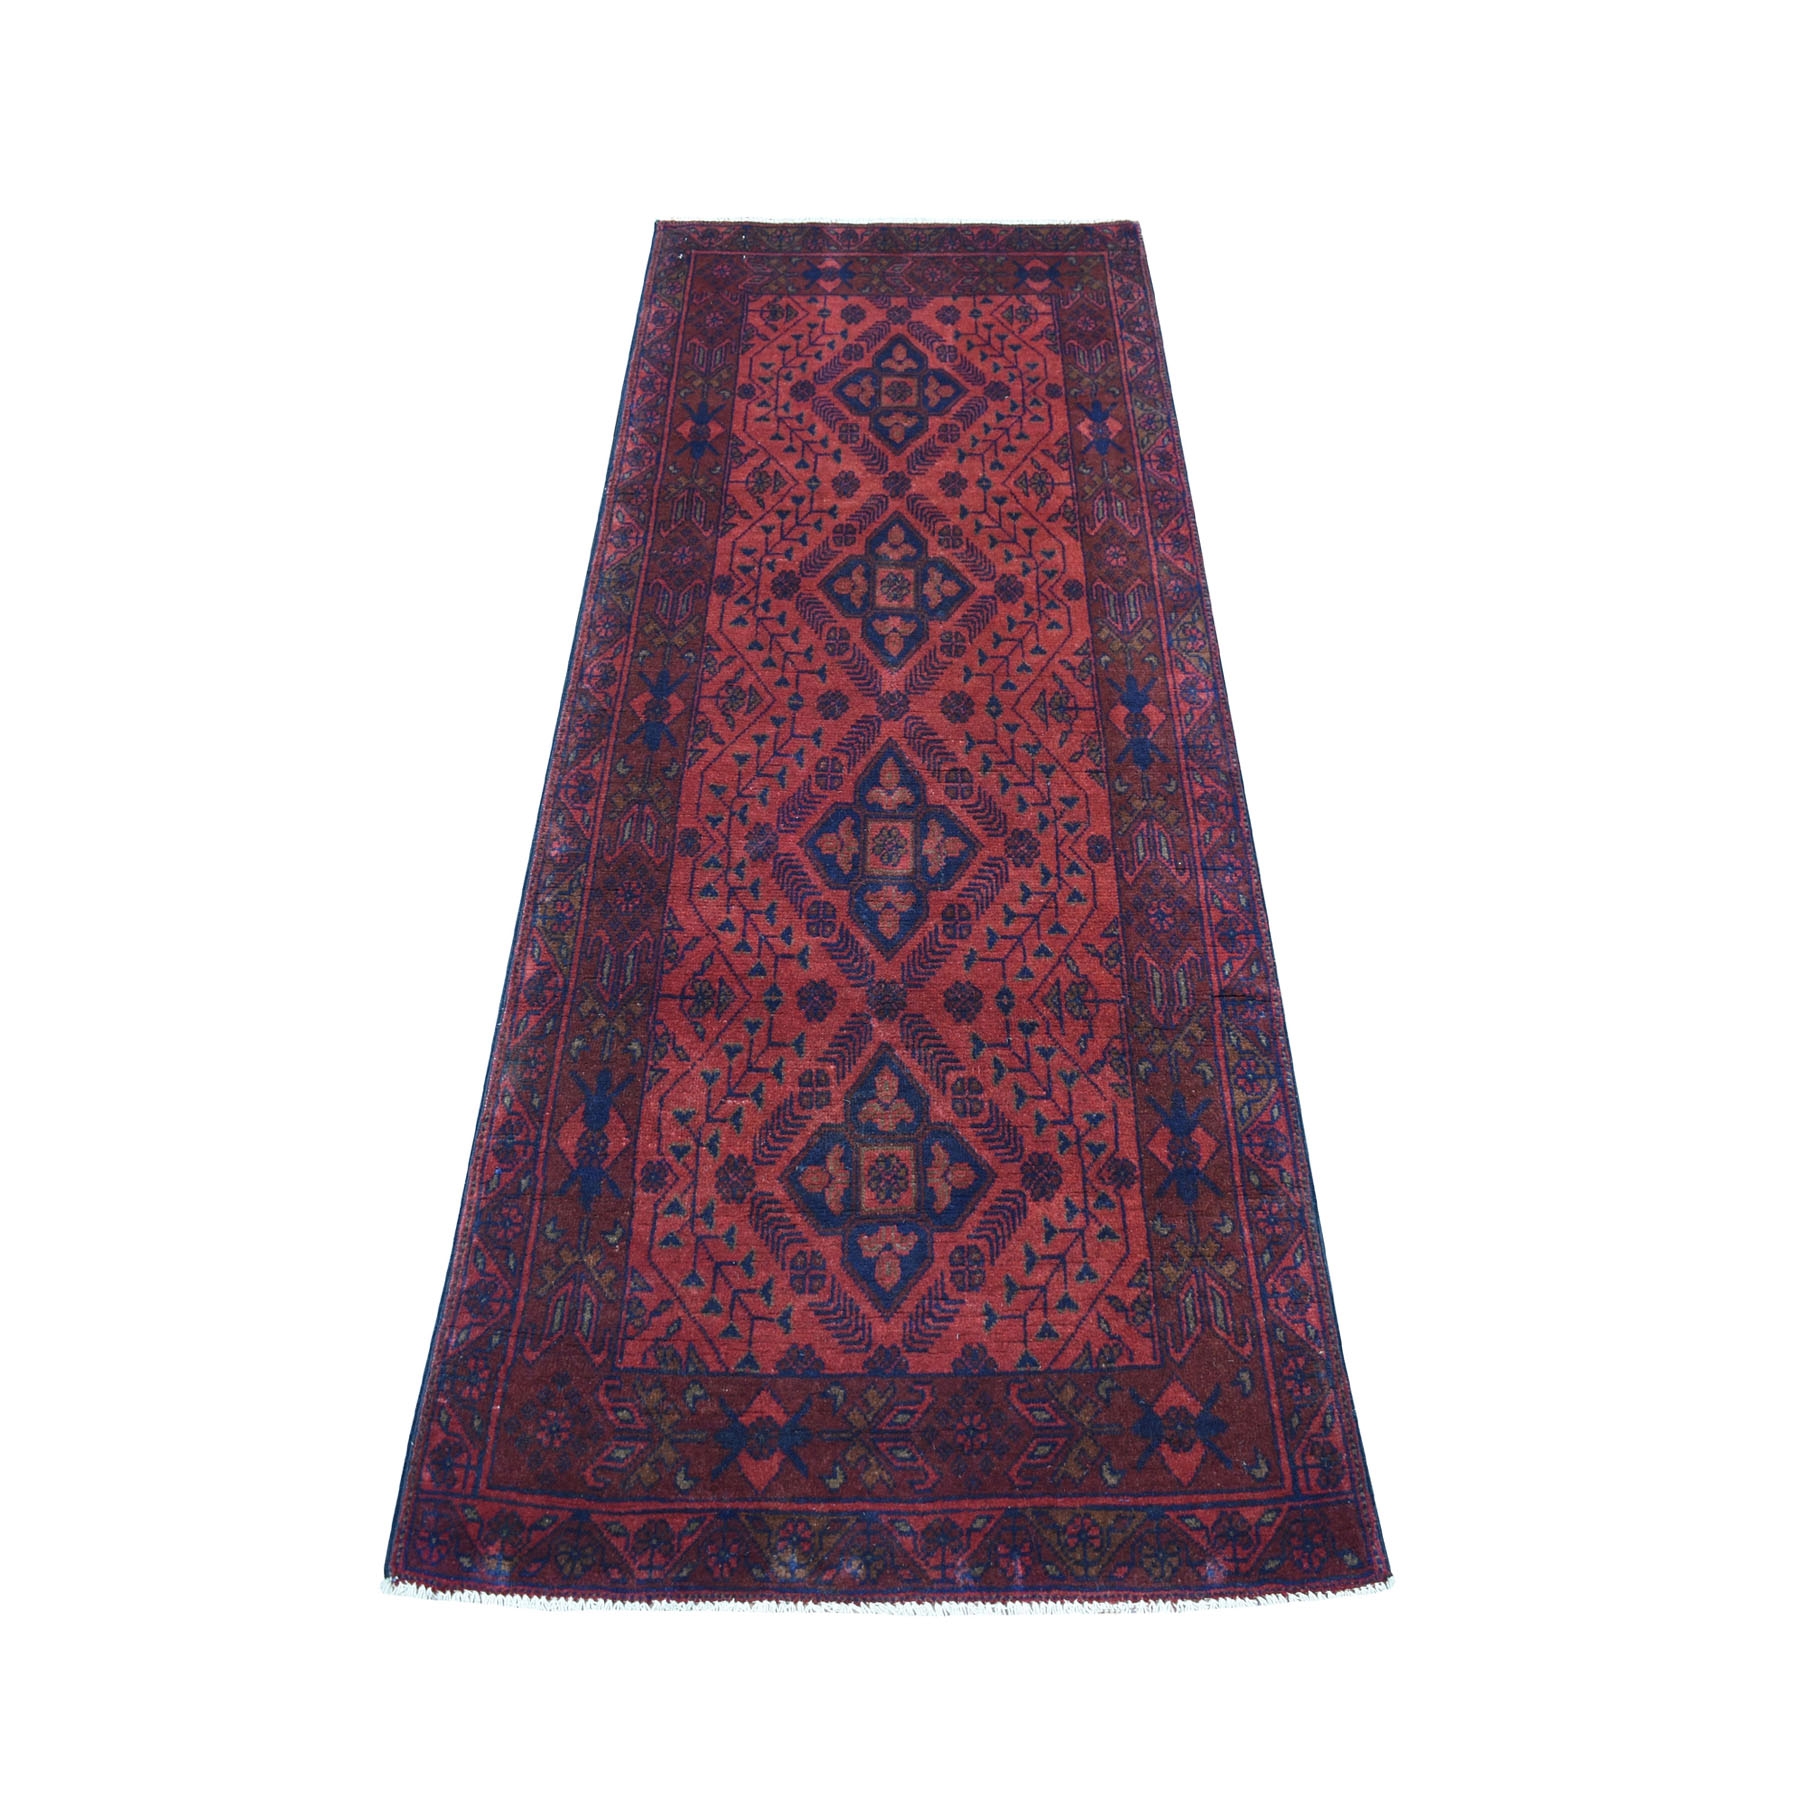 2'5"X6'4" Deep And Saturated Red Geometric Afghan Andkhoy Runner Pure Wool Hand Knotted Oriental Rug moaec70a